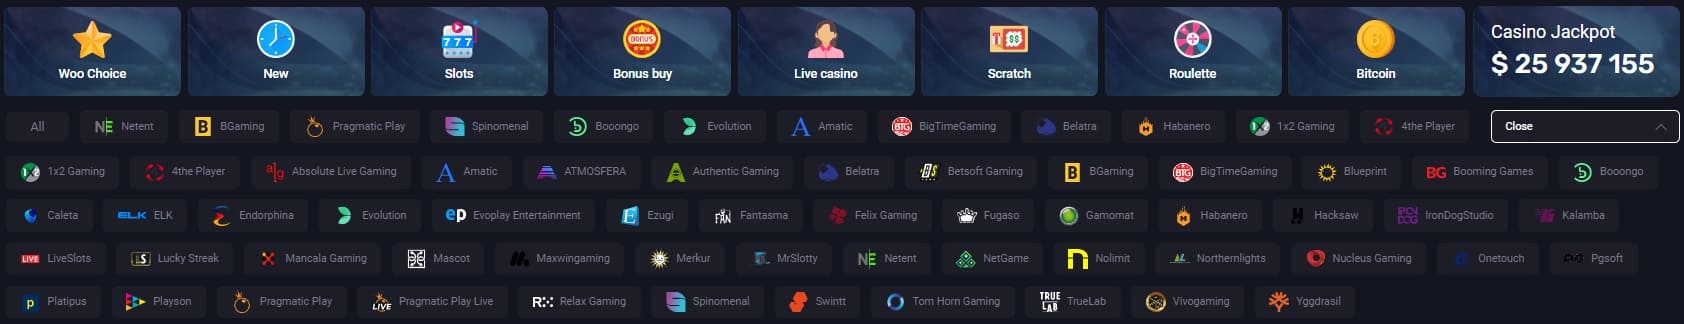 woocasino games and software developers